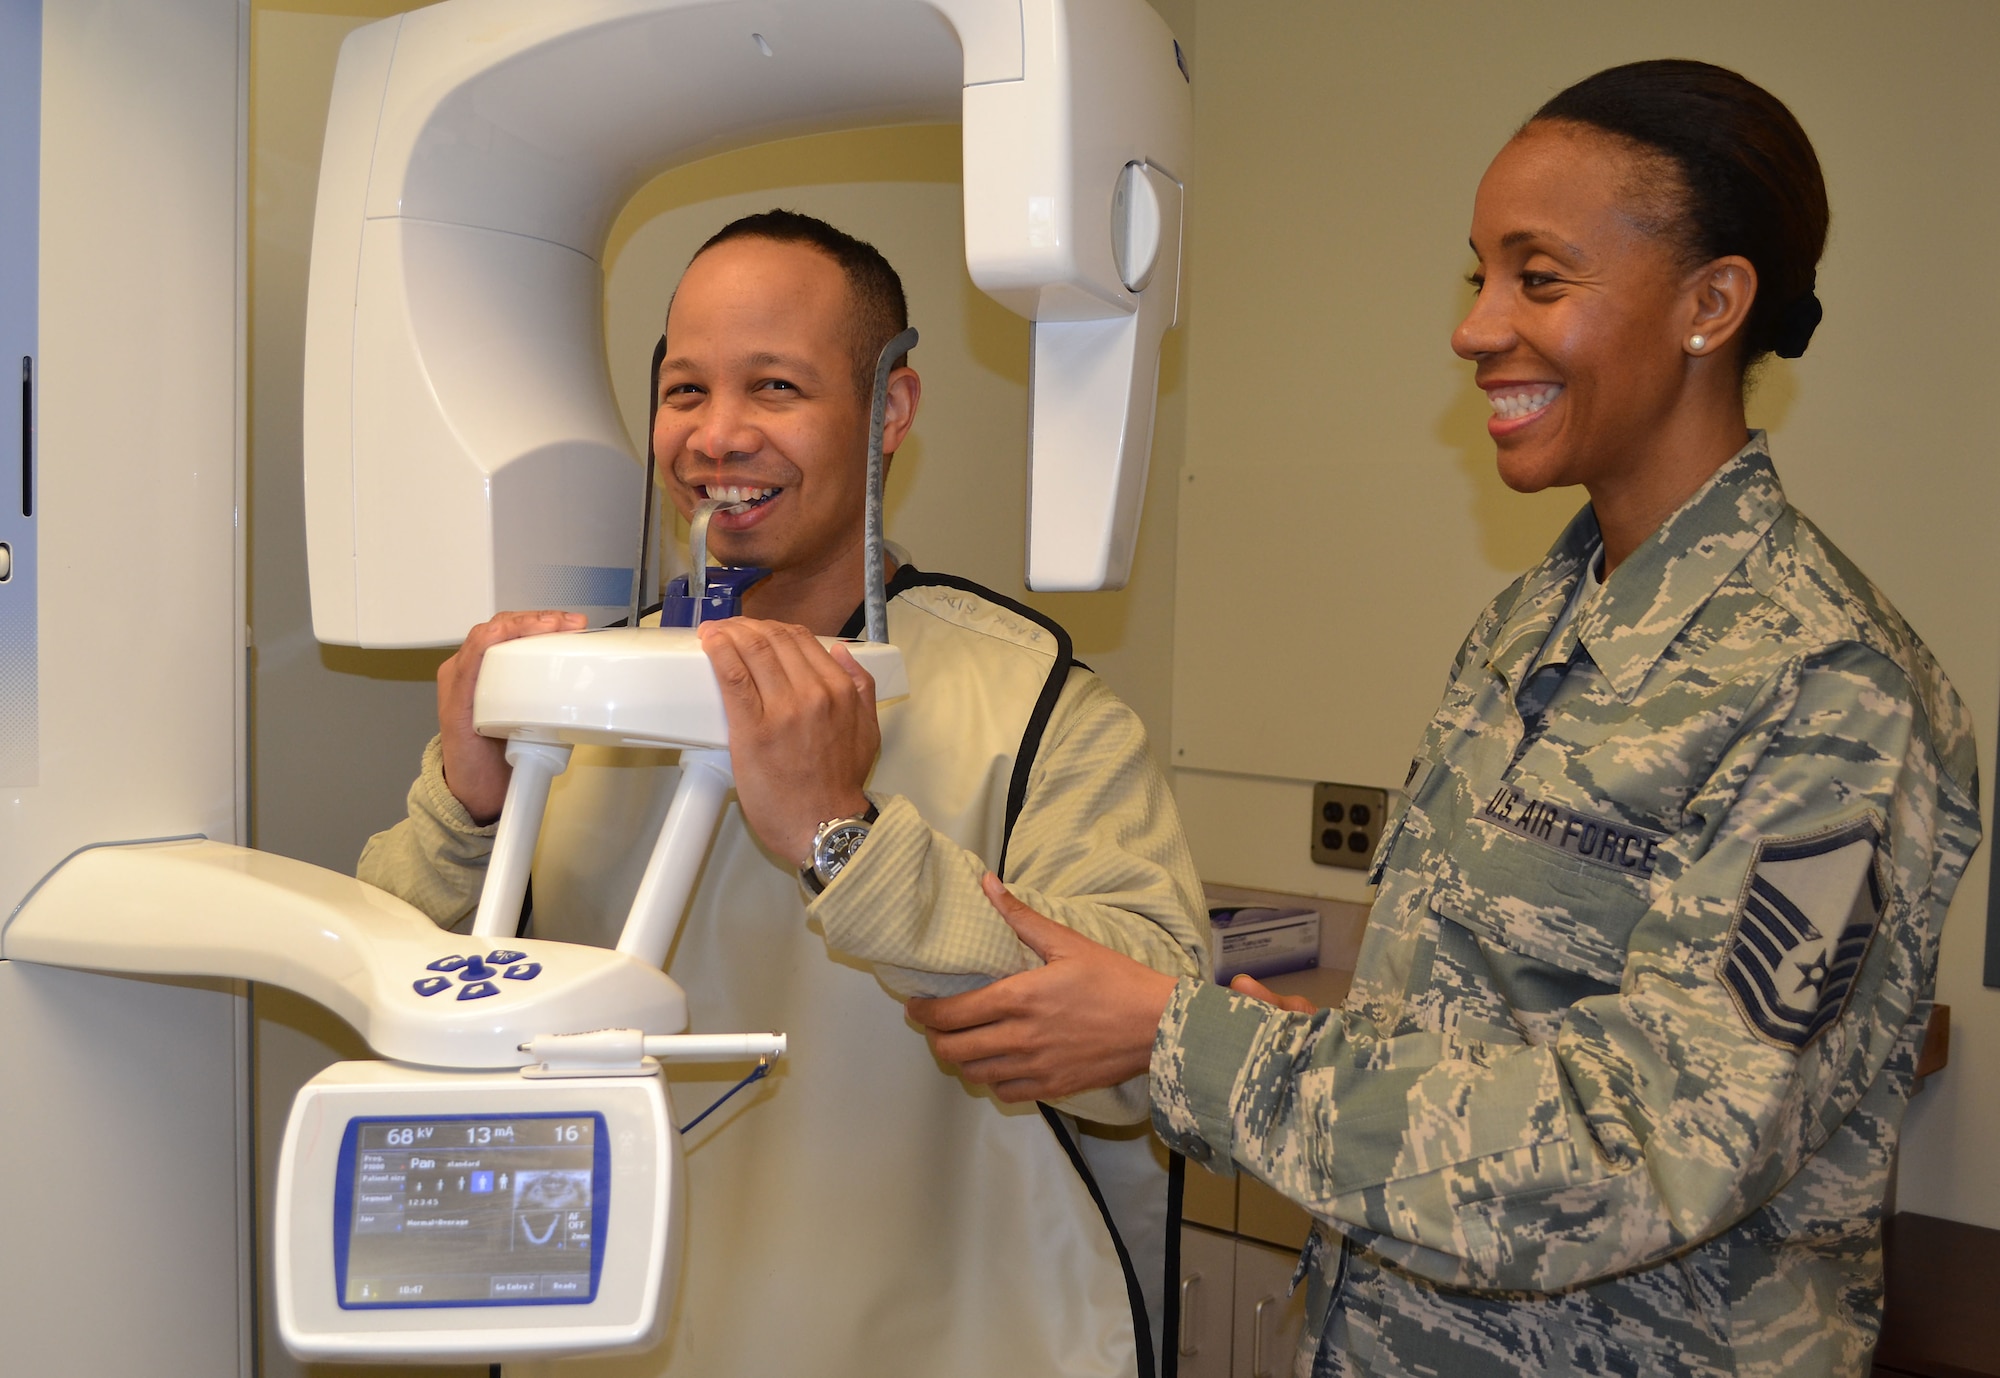 Master Sgt. Alexis Morrison, 111th Attack Wing Non-commissioned officer in charge of the dental clinic, positions Master Sgt. Roberto Brabham, 111th ATKW Medical Group, in the panoramic radiograph unit April 4, 2015 at the Horsham Air Guard Station dental clinic. The dental staff will take dental radiographs, as needed, to accomplish Wing members' yearly dental exam requirement. (U.S. Air National Guard photo by Tech. Sgt. Andria Allmond/Released)